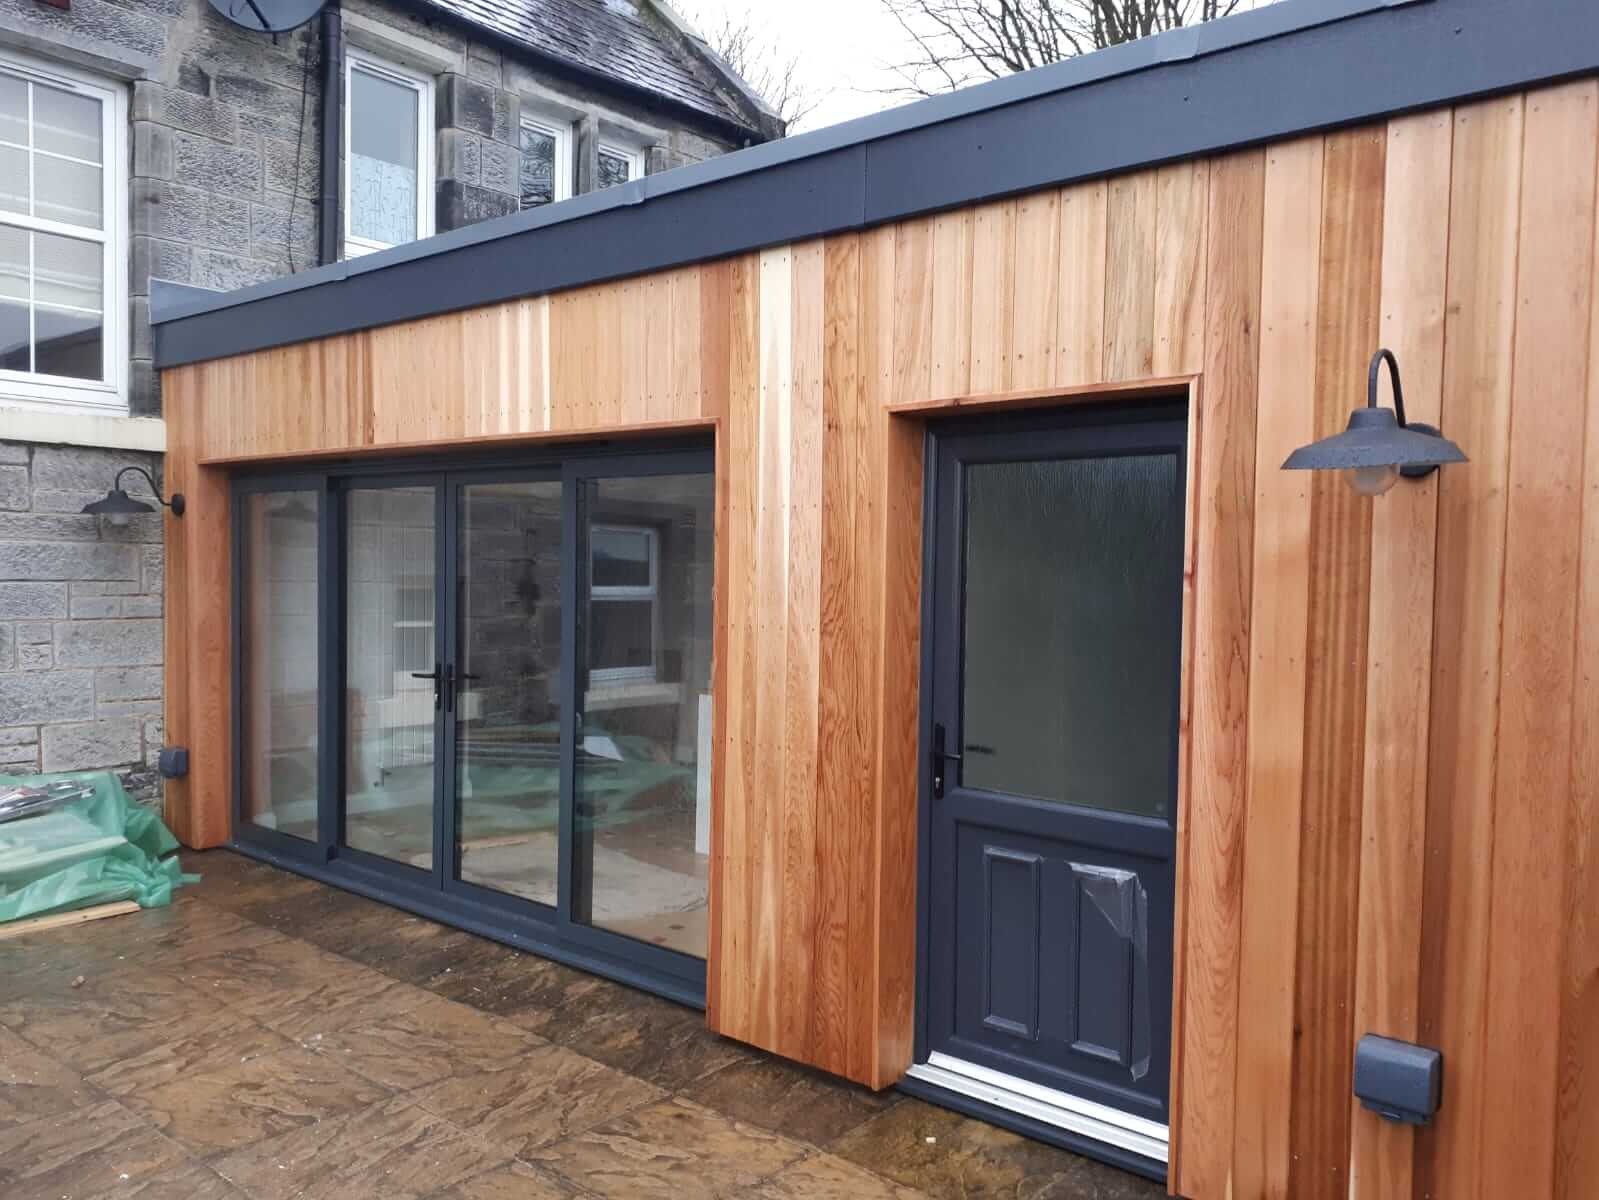 Extension to create kitchen, dining room, utility room and shower/toilet. Anthracite aluminium patio doors, cedar cladding, factre single membrane flat roof